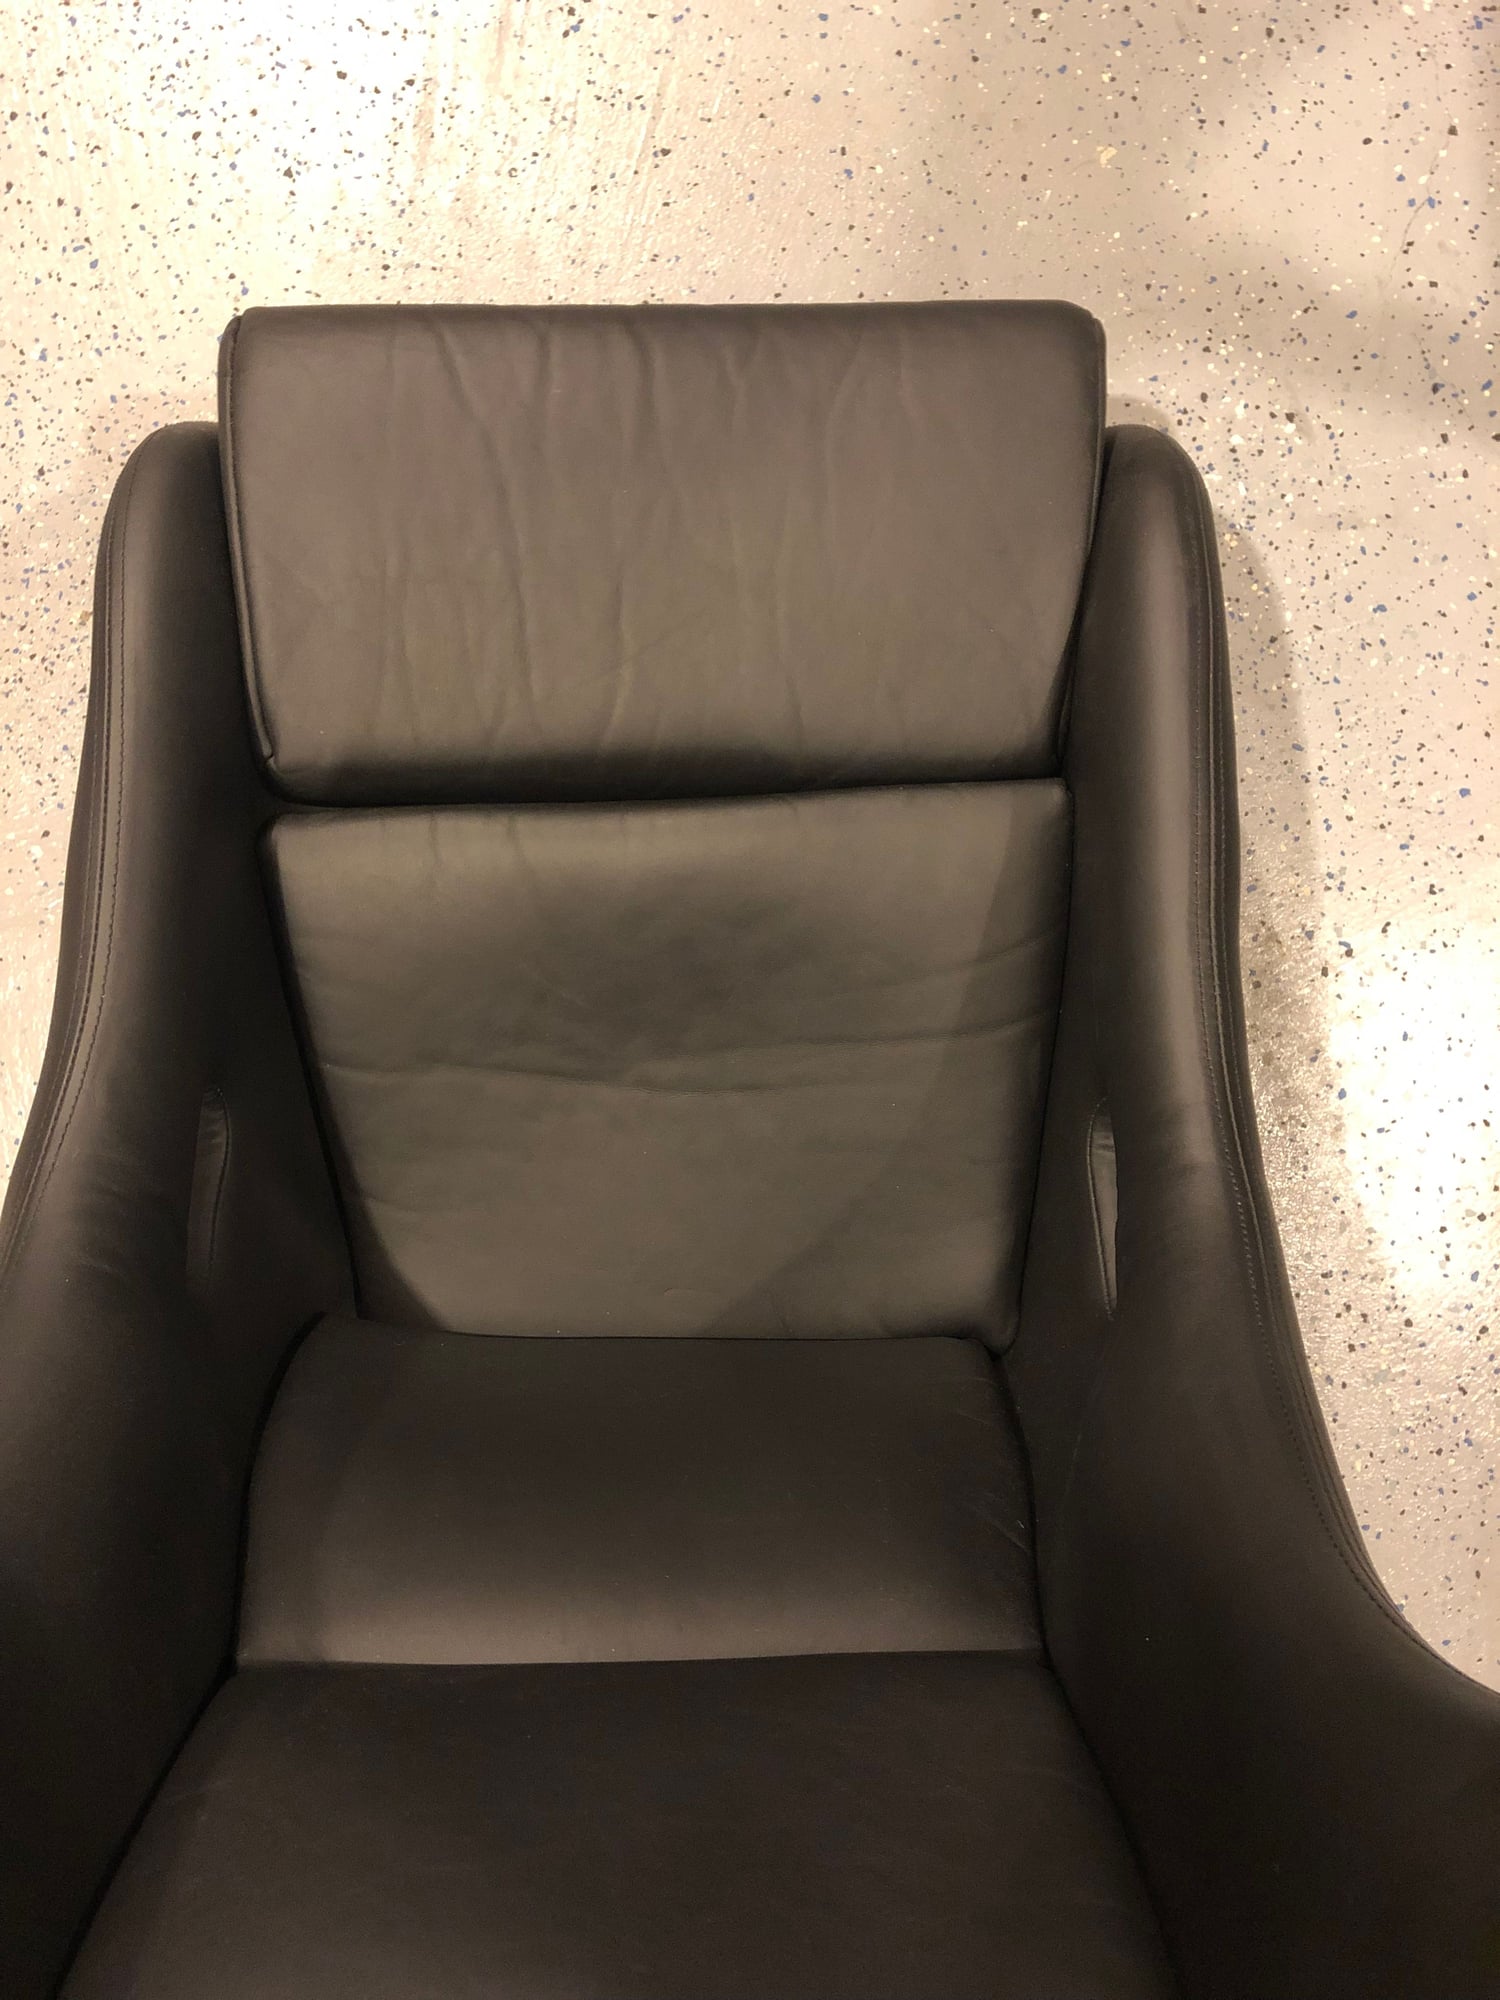 Interior/Upholstery - 996 GT3 Factory Euro Seats Black - Used - 2004 to 2011 Porsche All Models - Lake Forest, IL 60045, United States